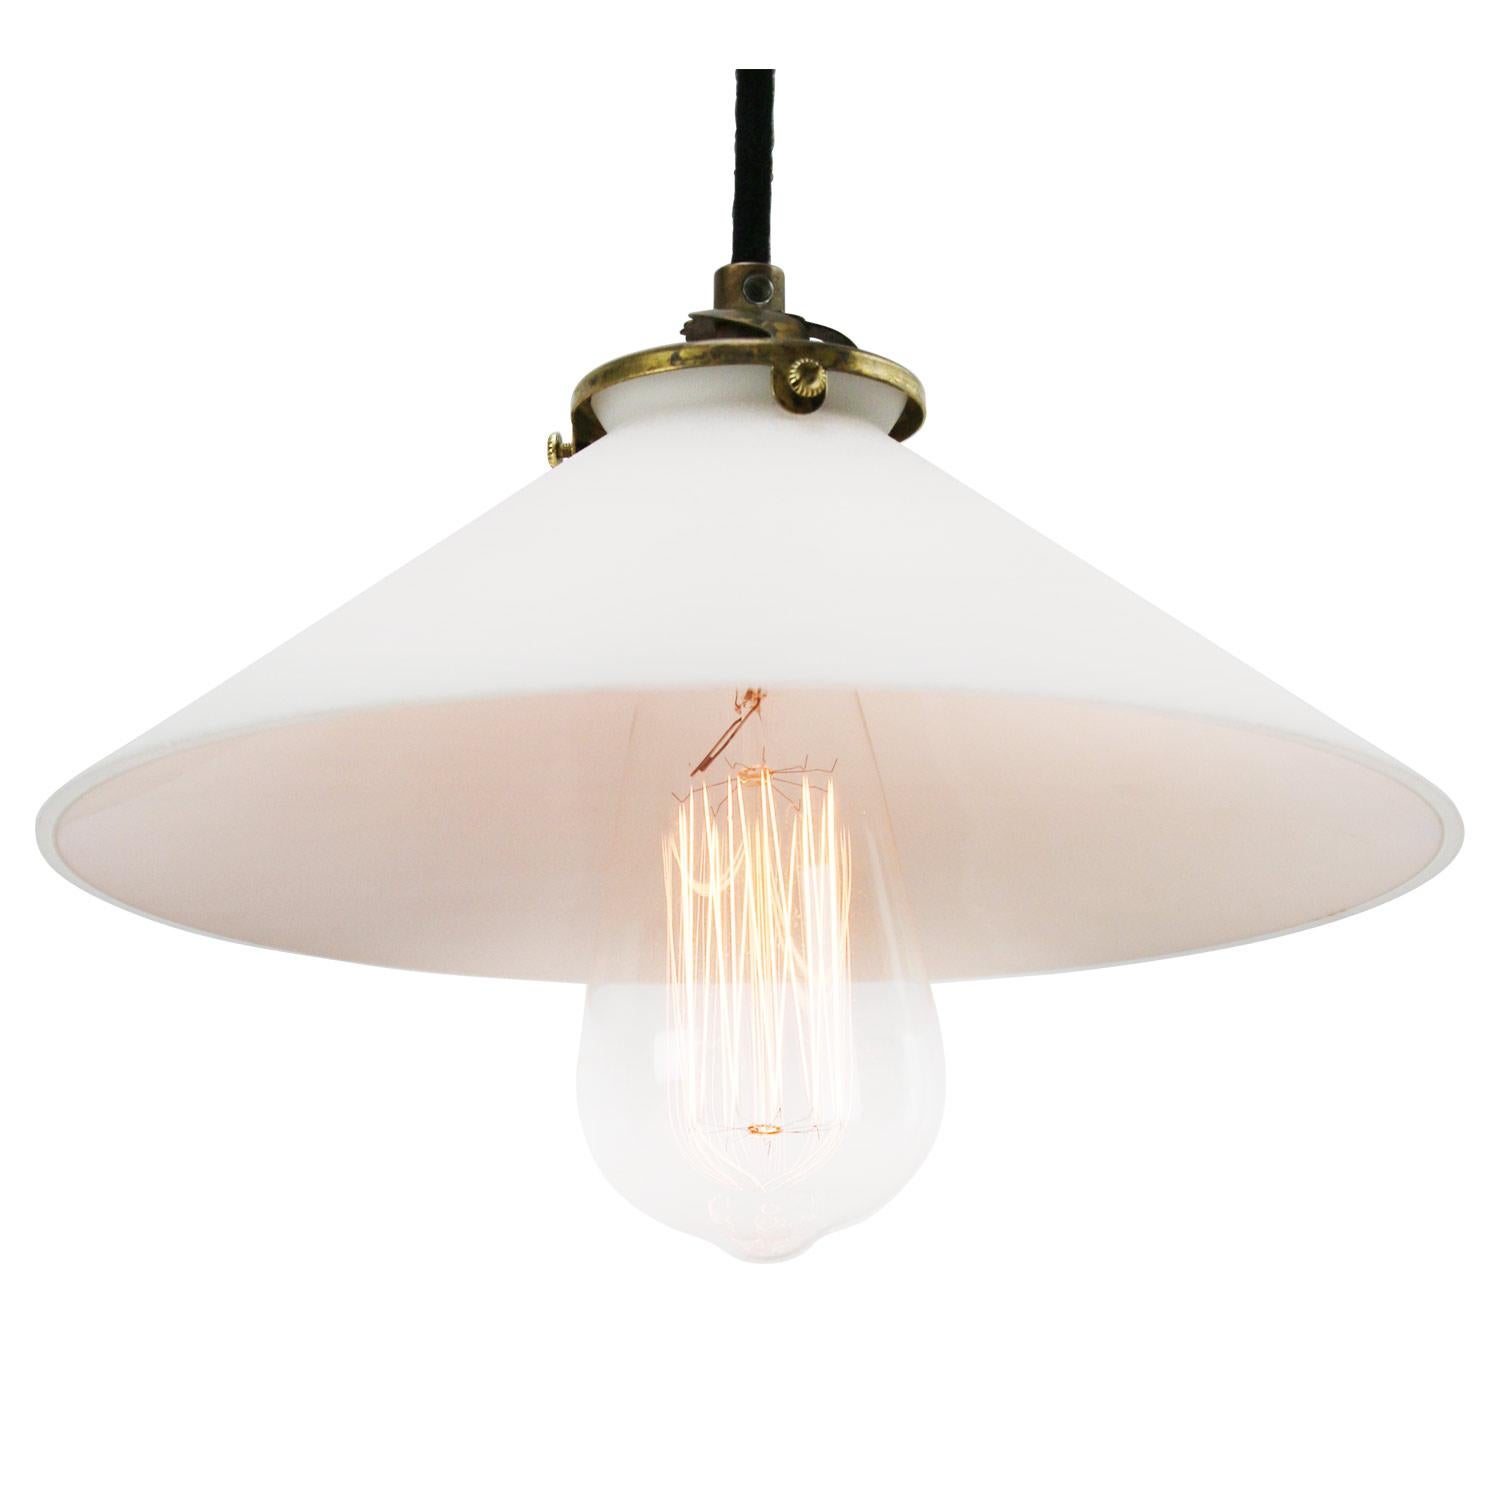 French opaline glass Industrial pendant. Excluding light bulb.

Mat outside, gloss inside

Measure: Weight 1.0 kg / 2.2 lb

Priced per individual item. All lamps have been made suitable by international standards for incandescent light bulbs,